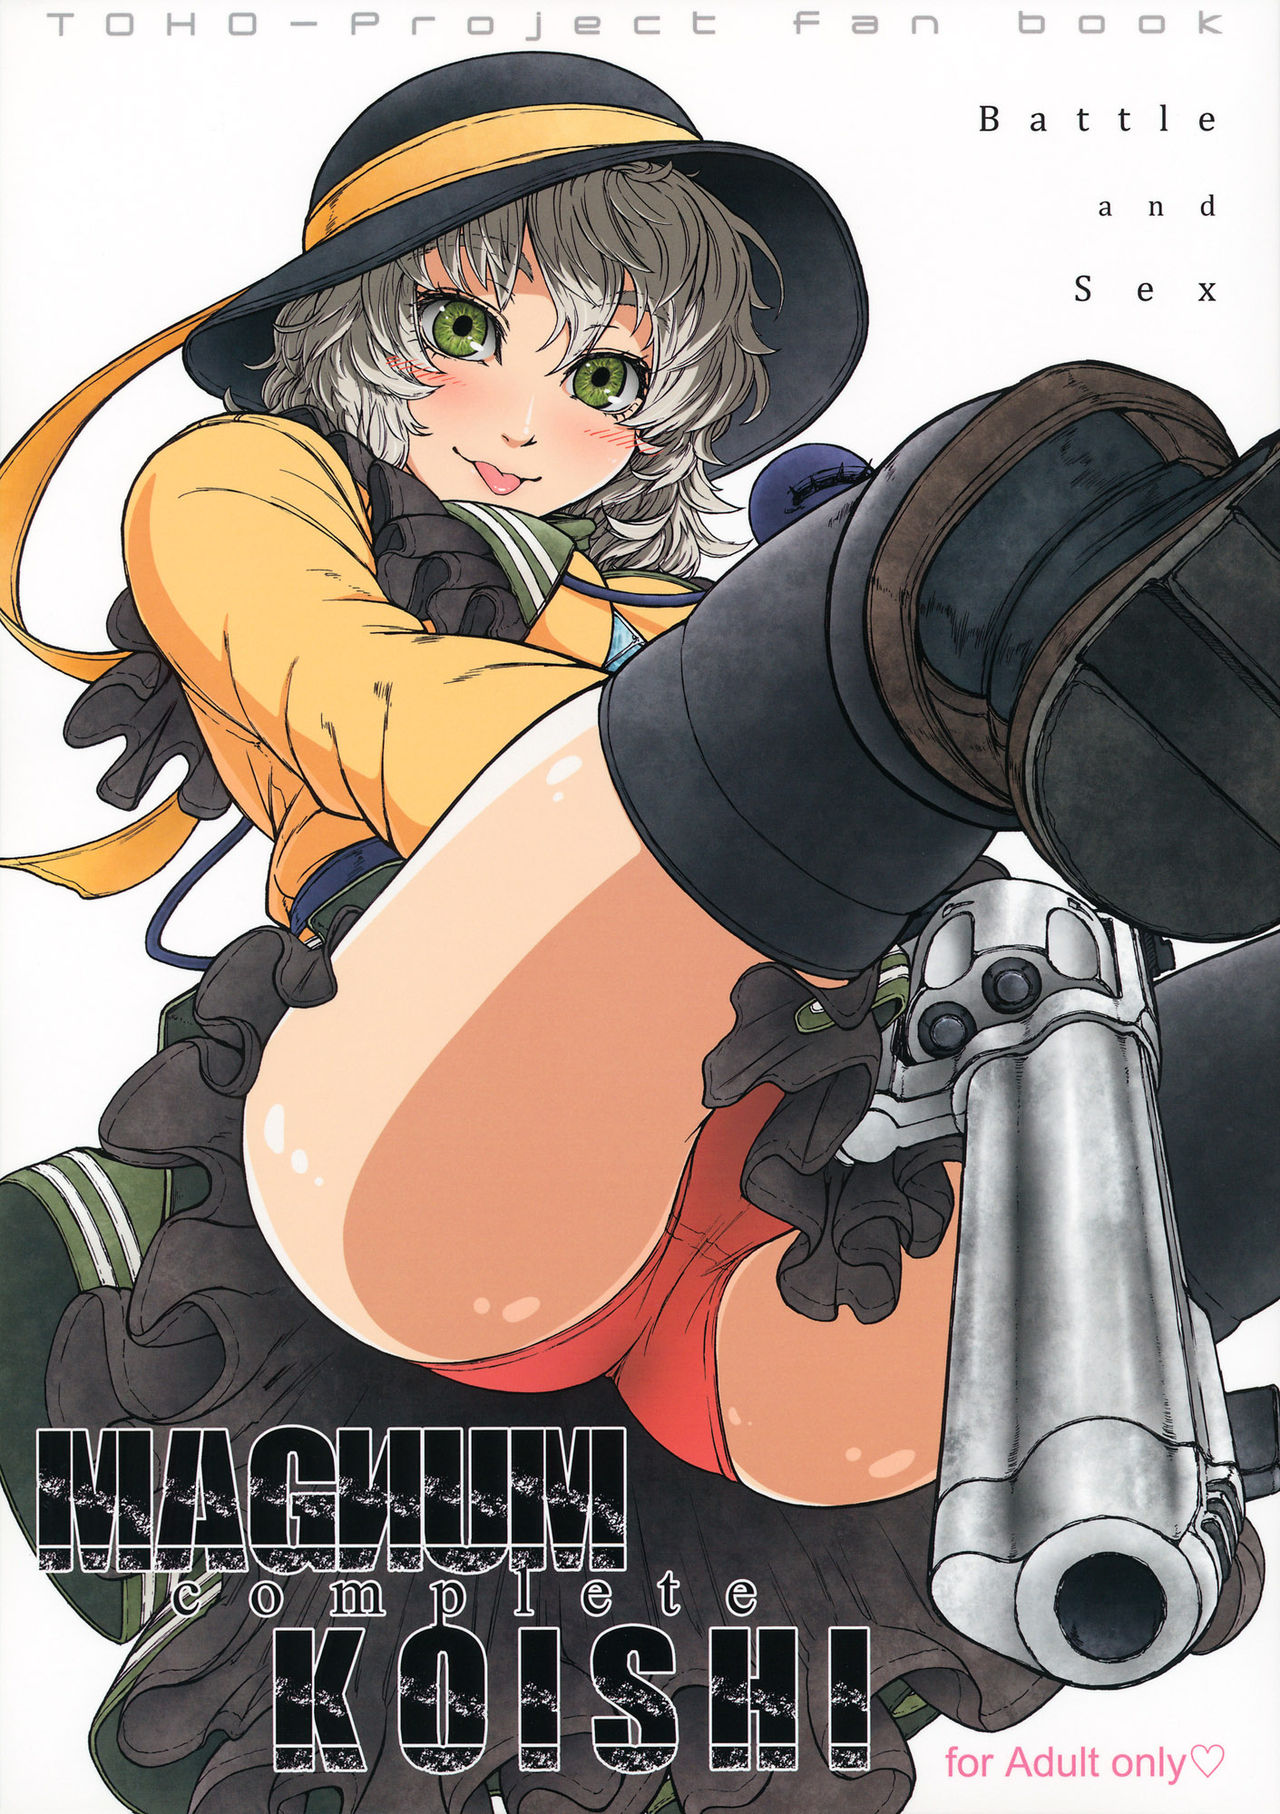 (C83) [UNKNOWN (Imizu)] MAGNUM KOISHI -COMPLETE- (Touhou Project) [English] =Pineapples r' Us= (C83) [UNKNOWN (威未図)] MAGNUM KOISHI -COMPLETE- (東方Project) [英訳]